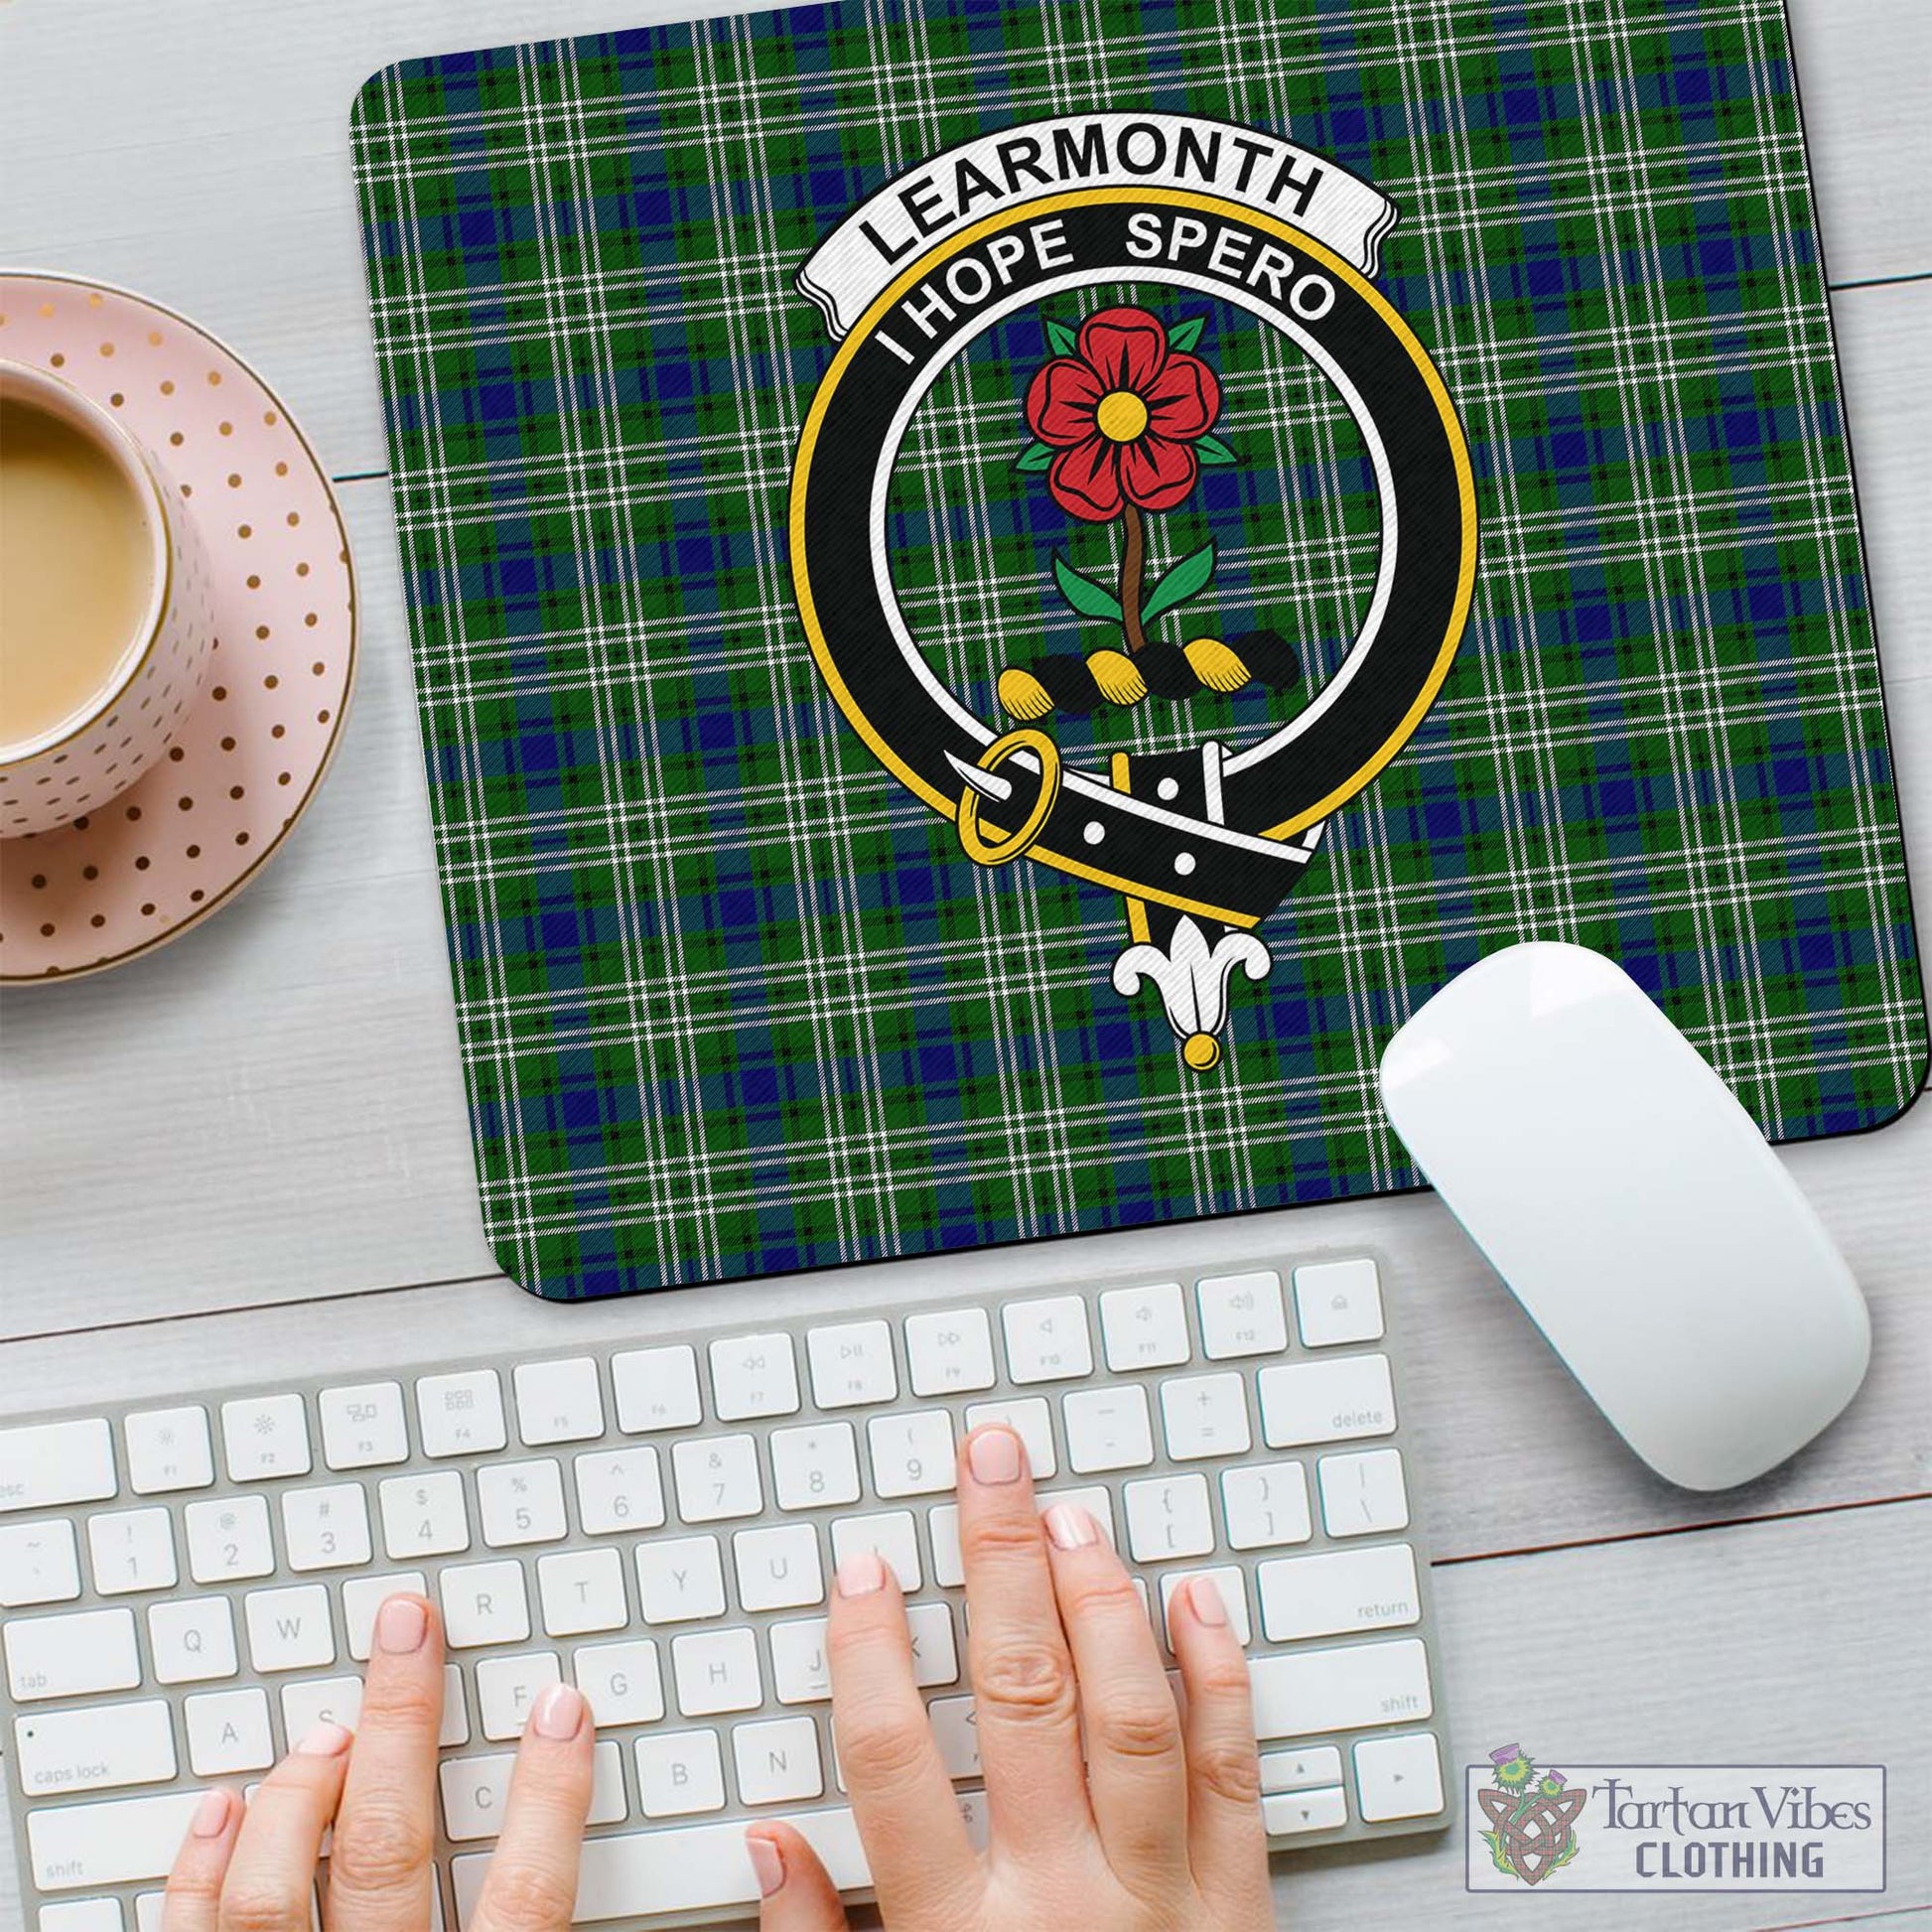 Tartan Vibes Clothing Learmonth Tartan Mouse Pad with Family Crest